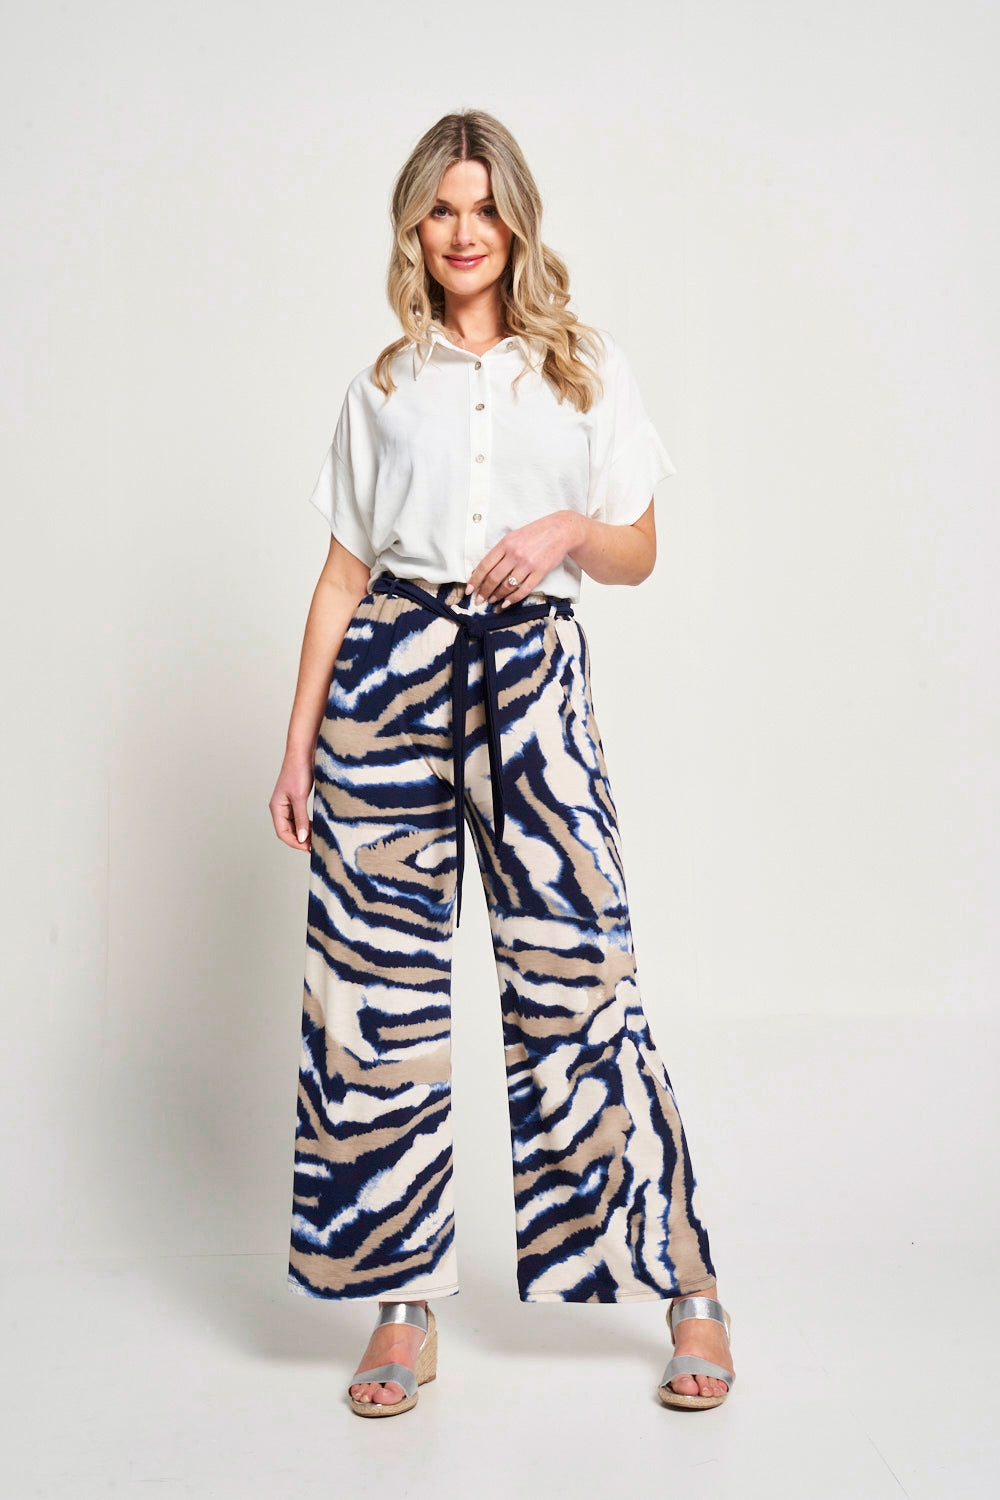 Saloos Animal Print Trousers with Fabric Belt